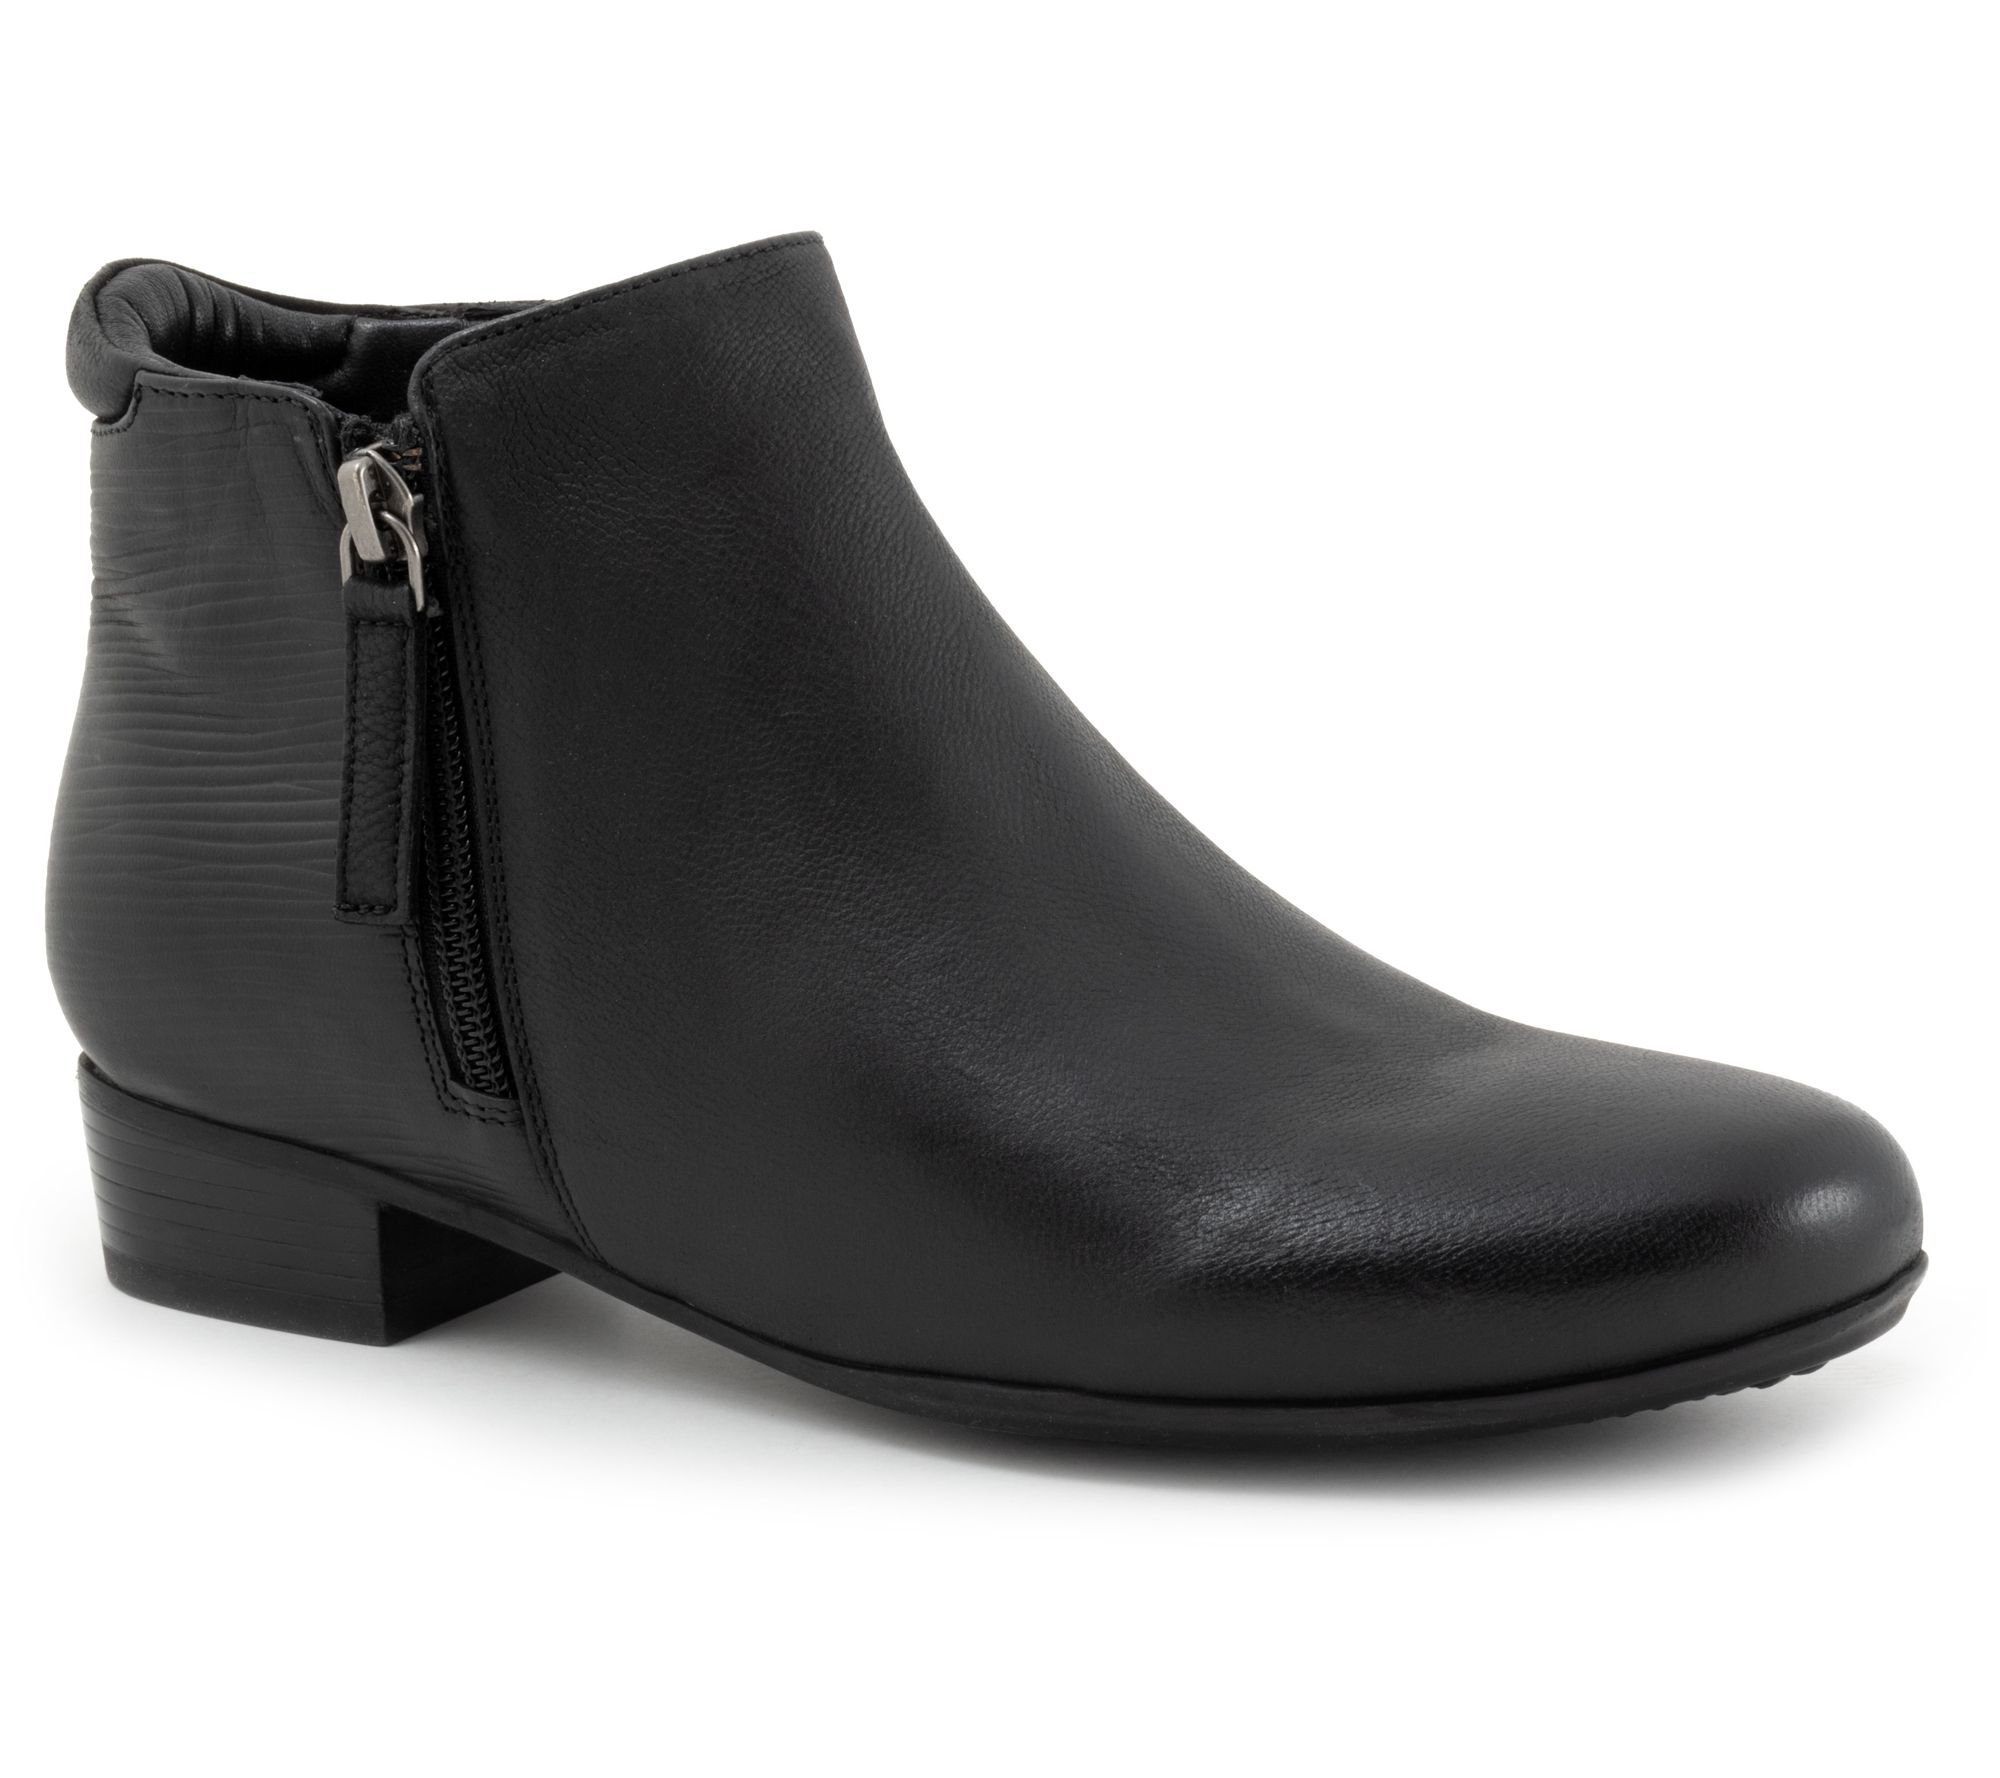 Trotters Women's Major Embossed Ankle Boots - QVC.com